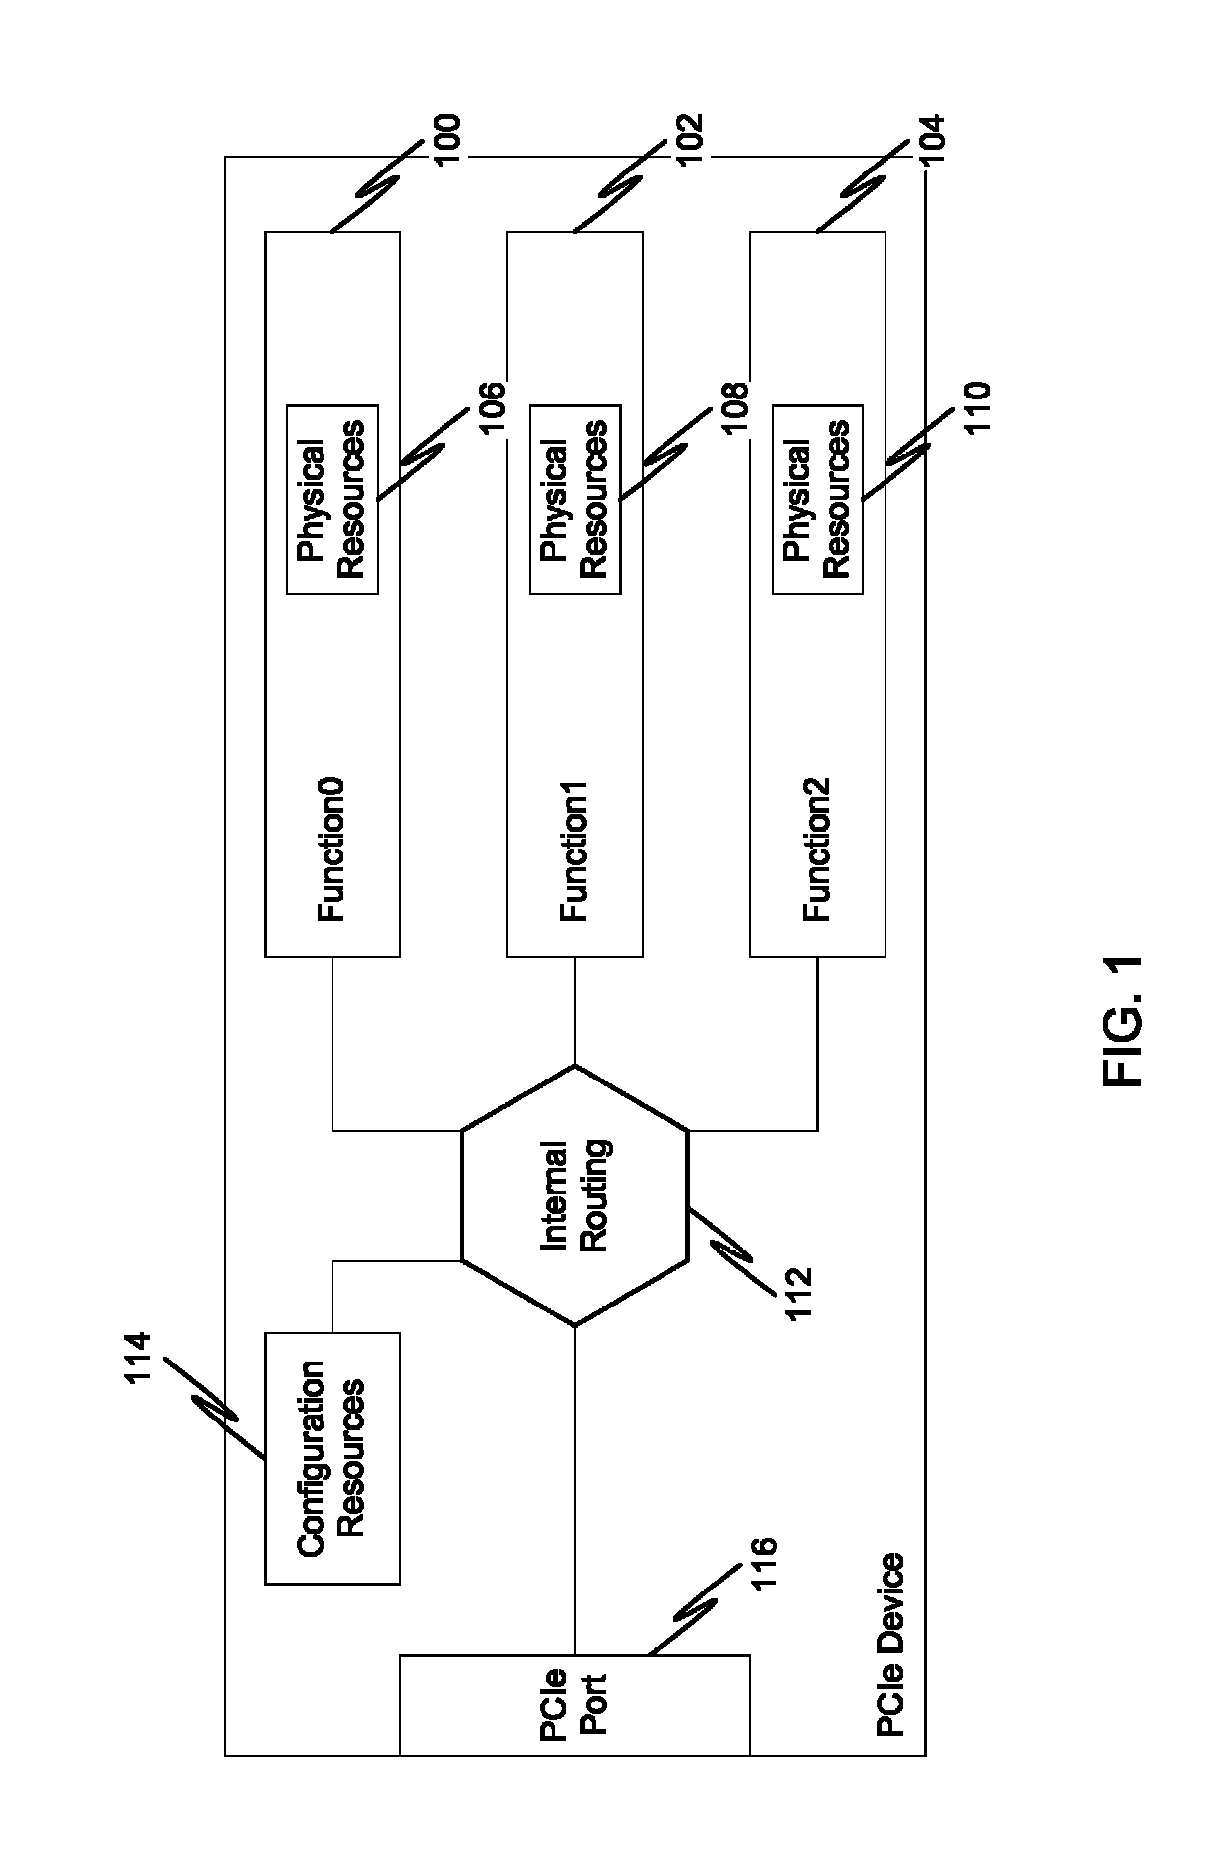 Multi-root sharing of single-root input/output virtualization